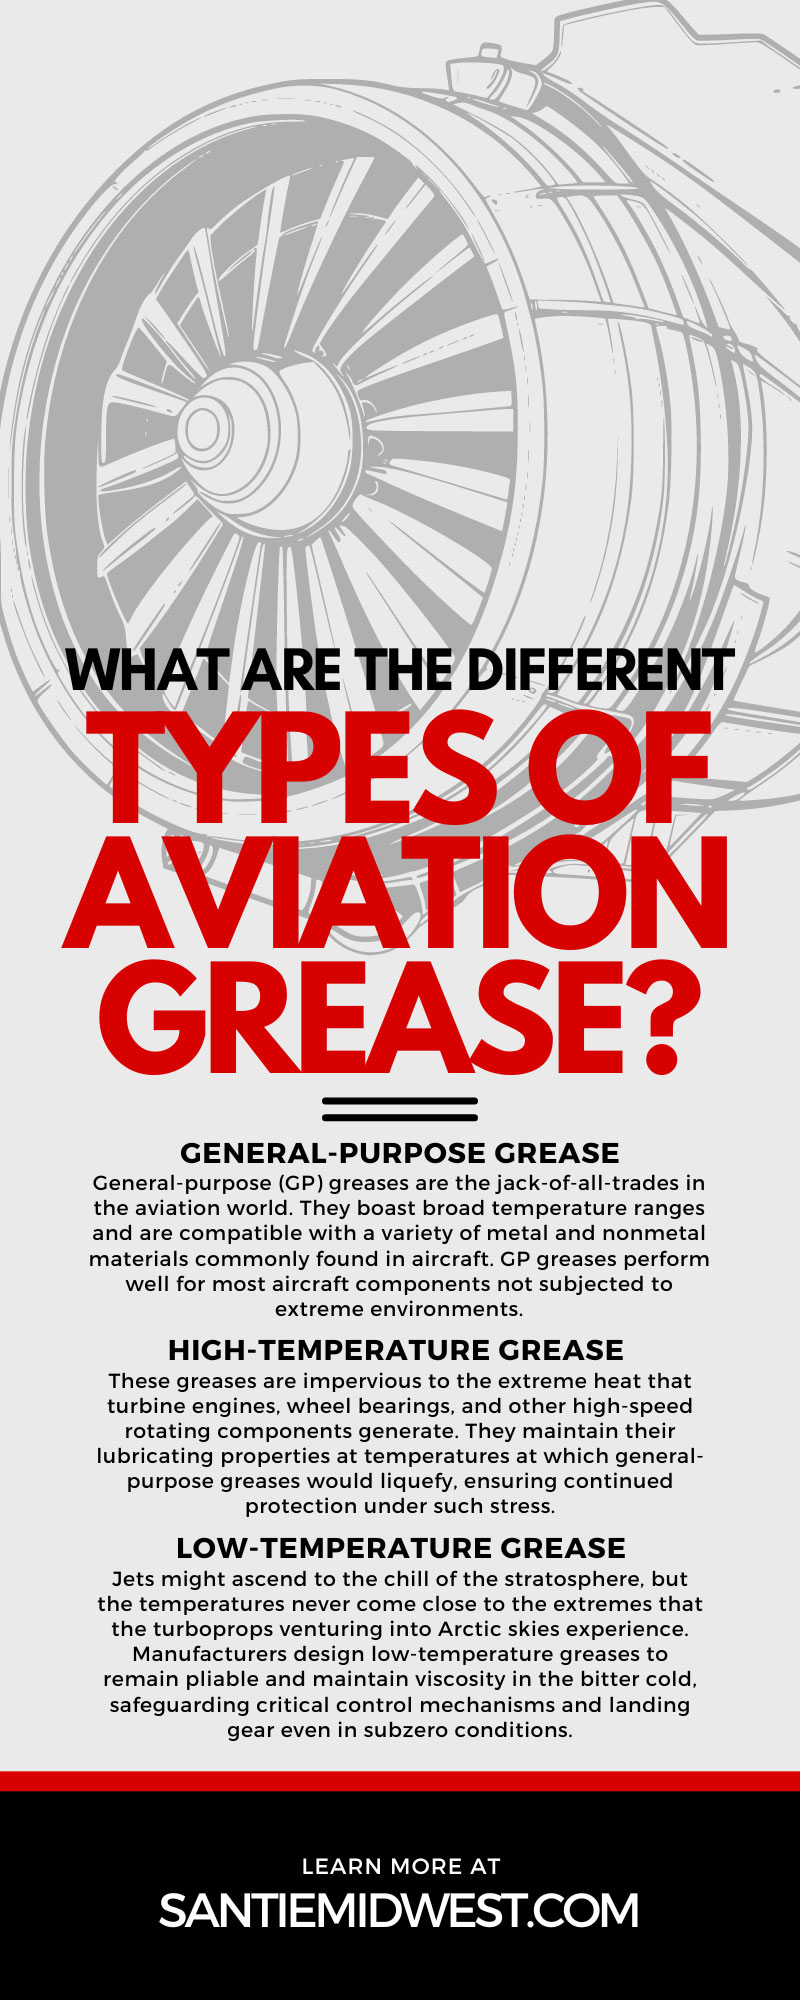 What Are the Different Types of Aviation Grease?